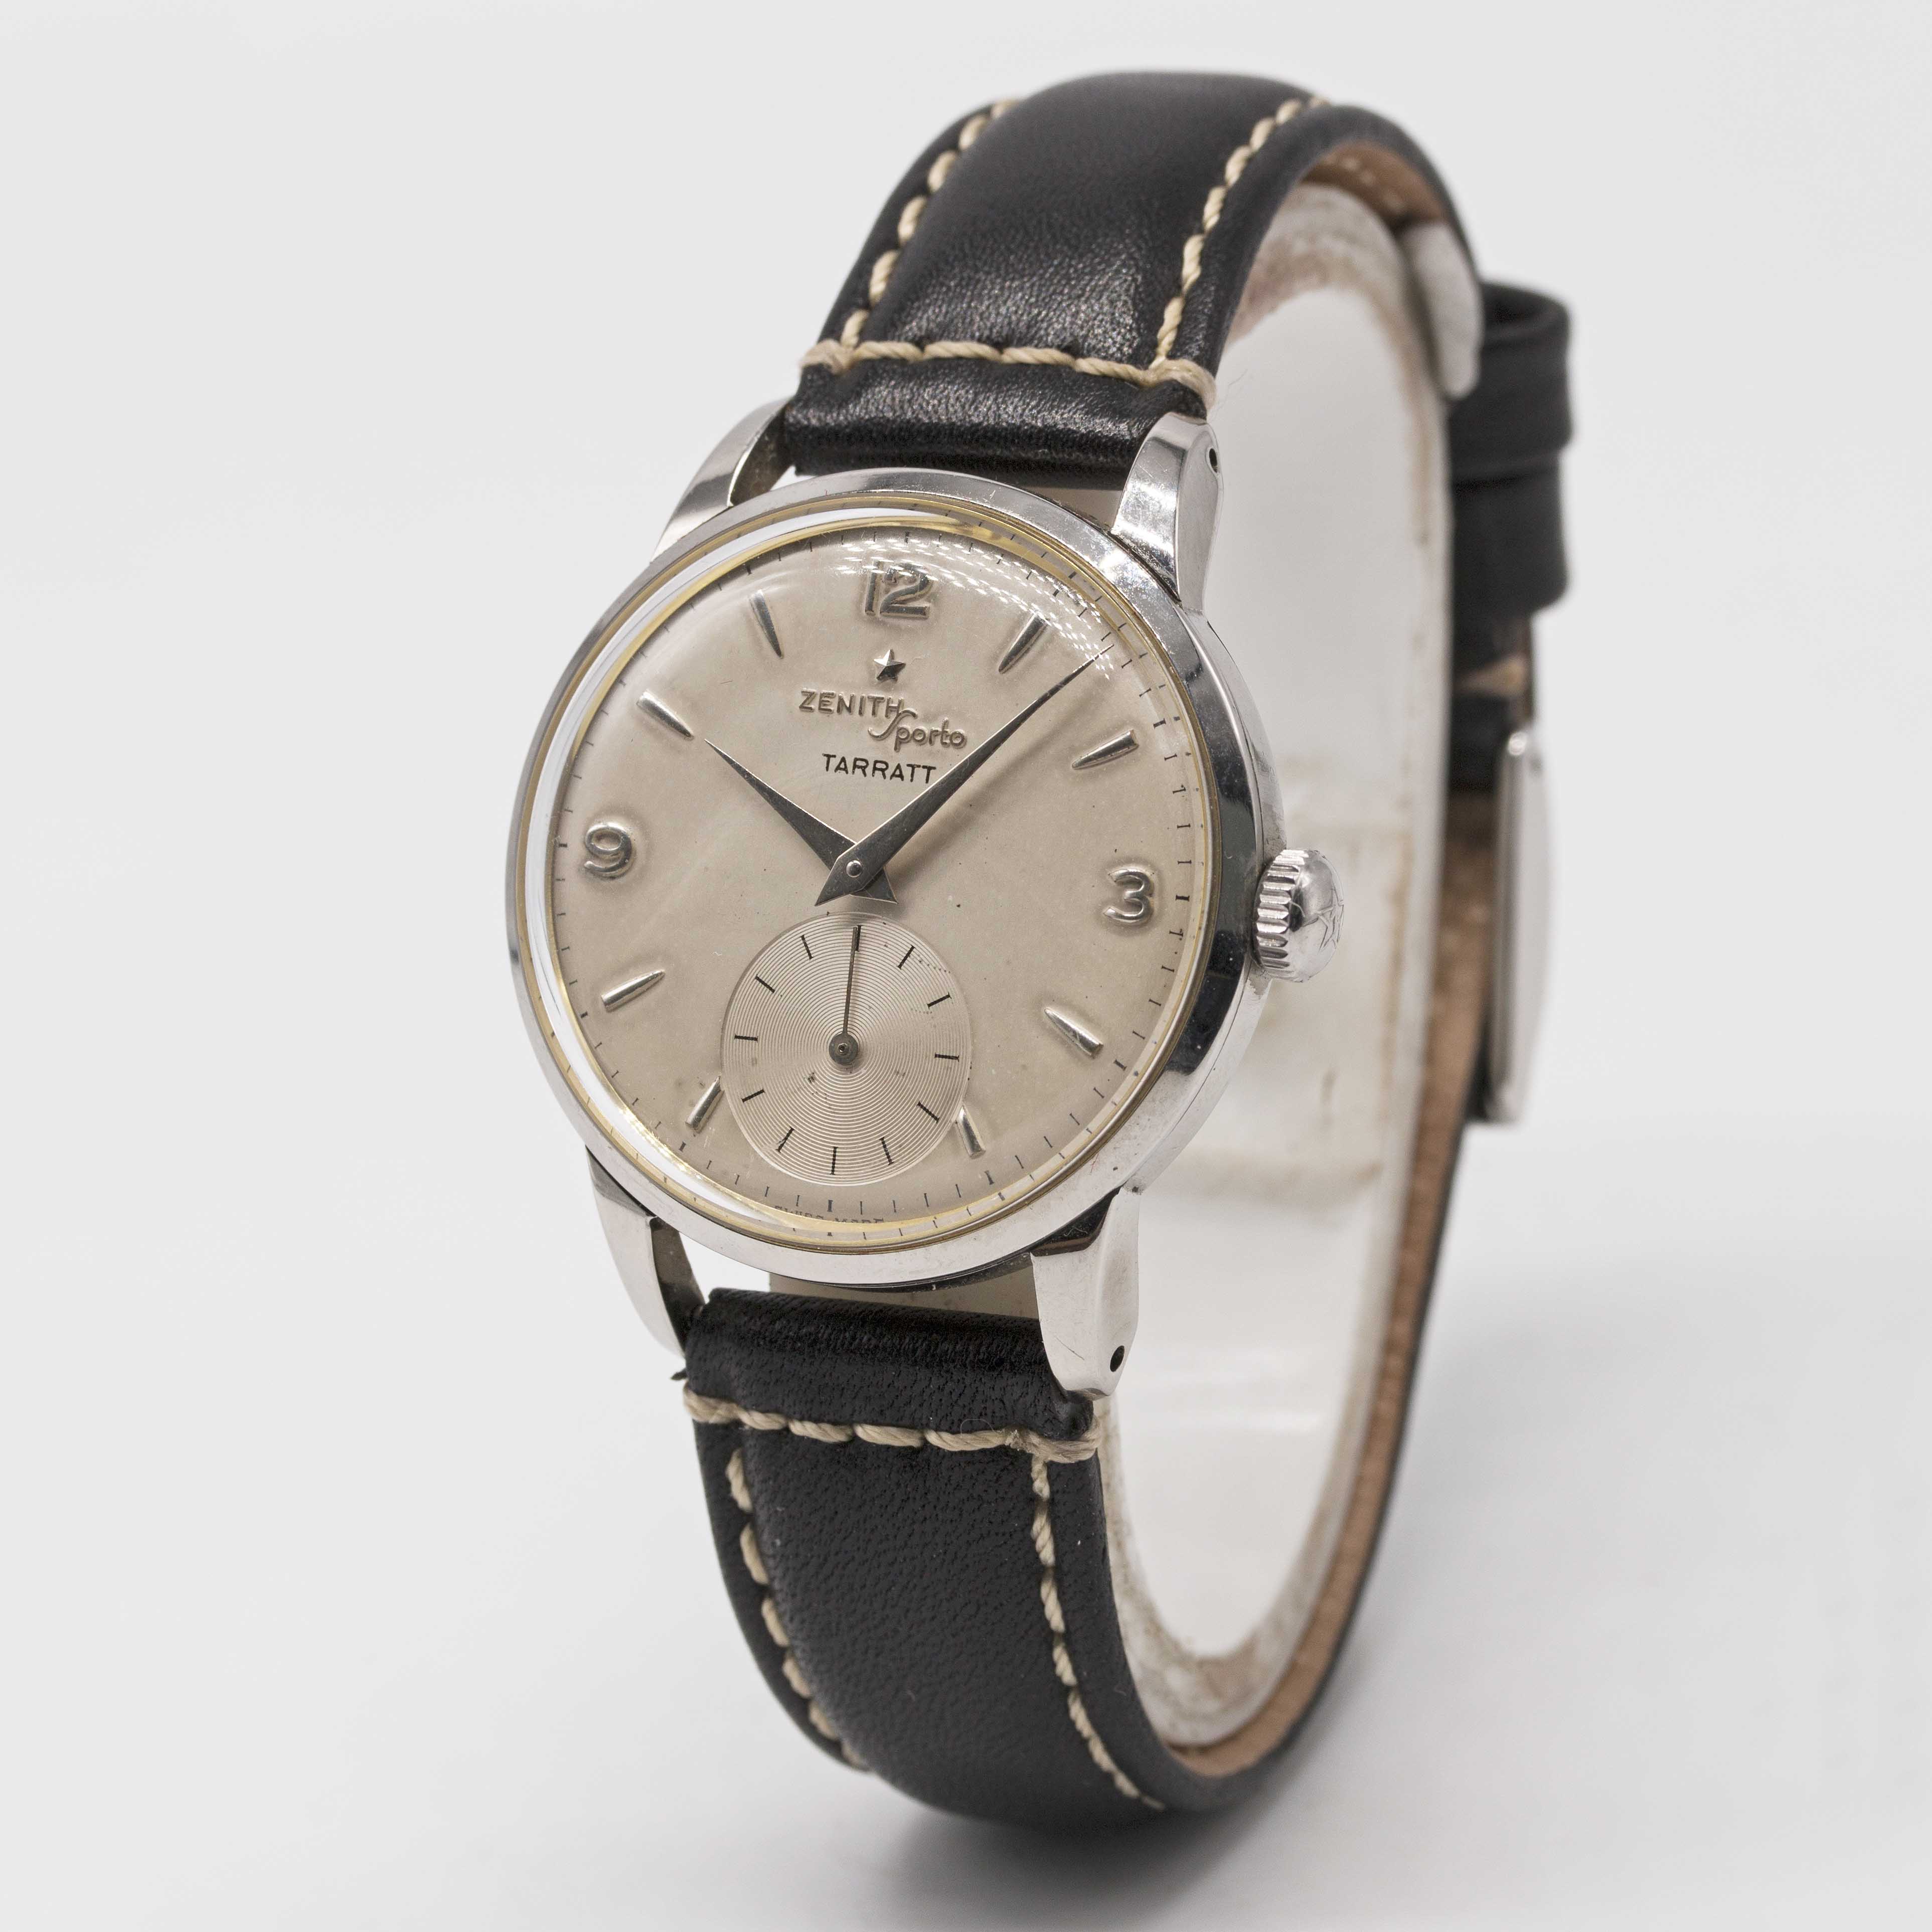 A GENTLEMAN'S STAINLESS STEEL ZENITH SPORTO WRIST WATCH CIRCA 1960, RETAILED BY TARRATT WITH CO- - Image 3 of 8